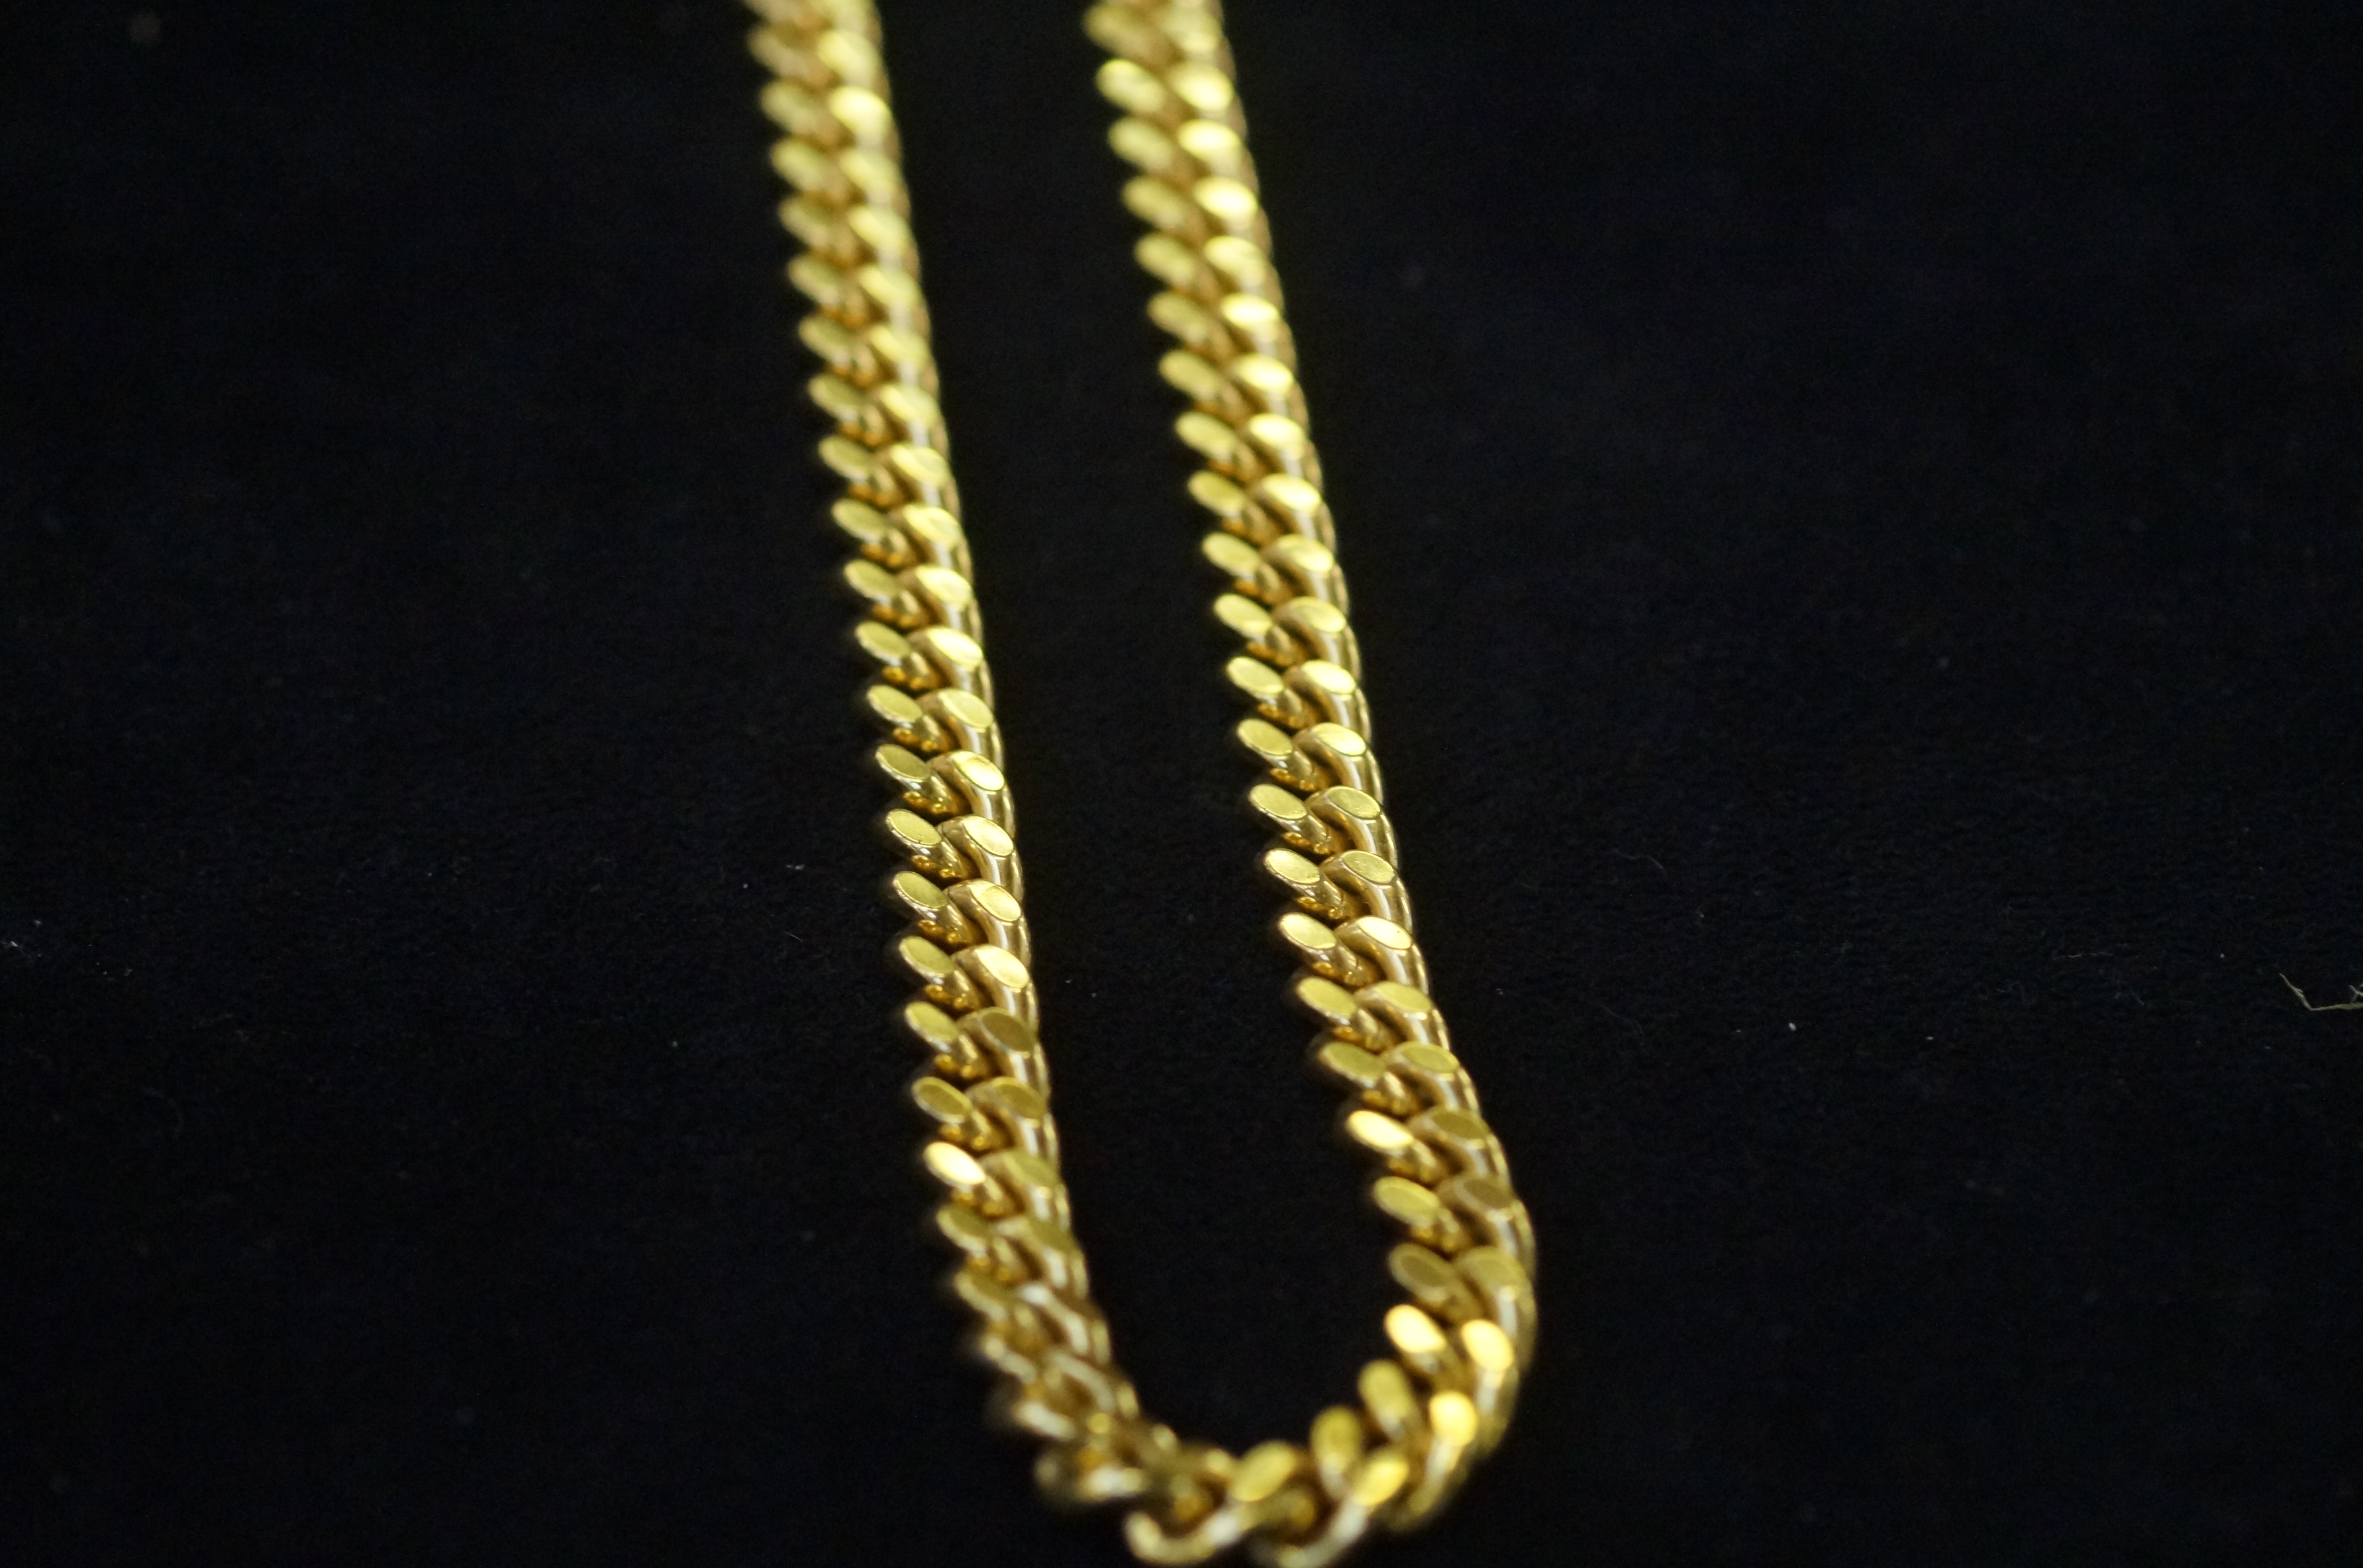 Large & heavy gold plated metal chain